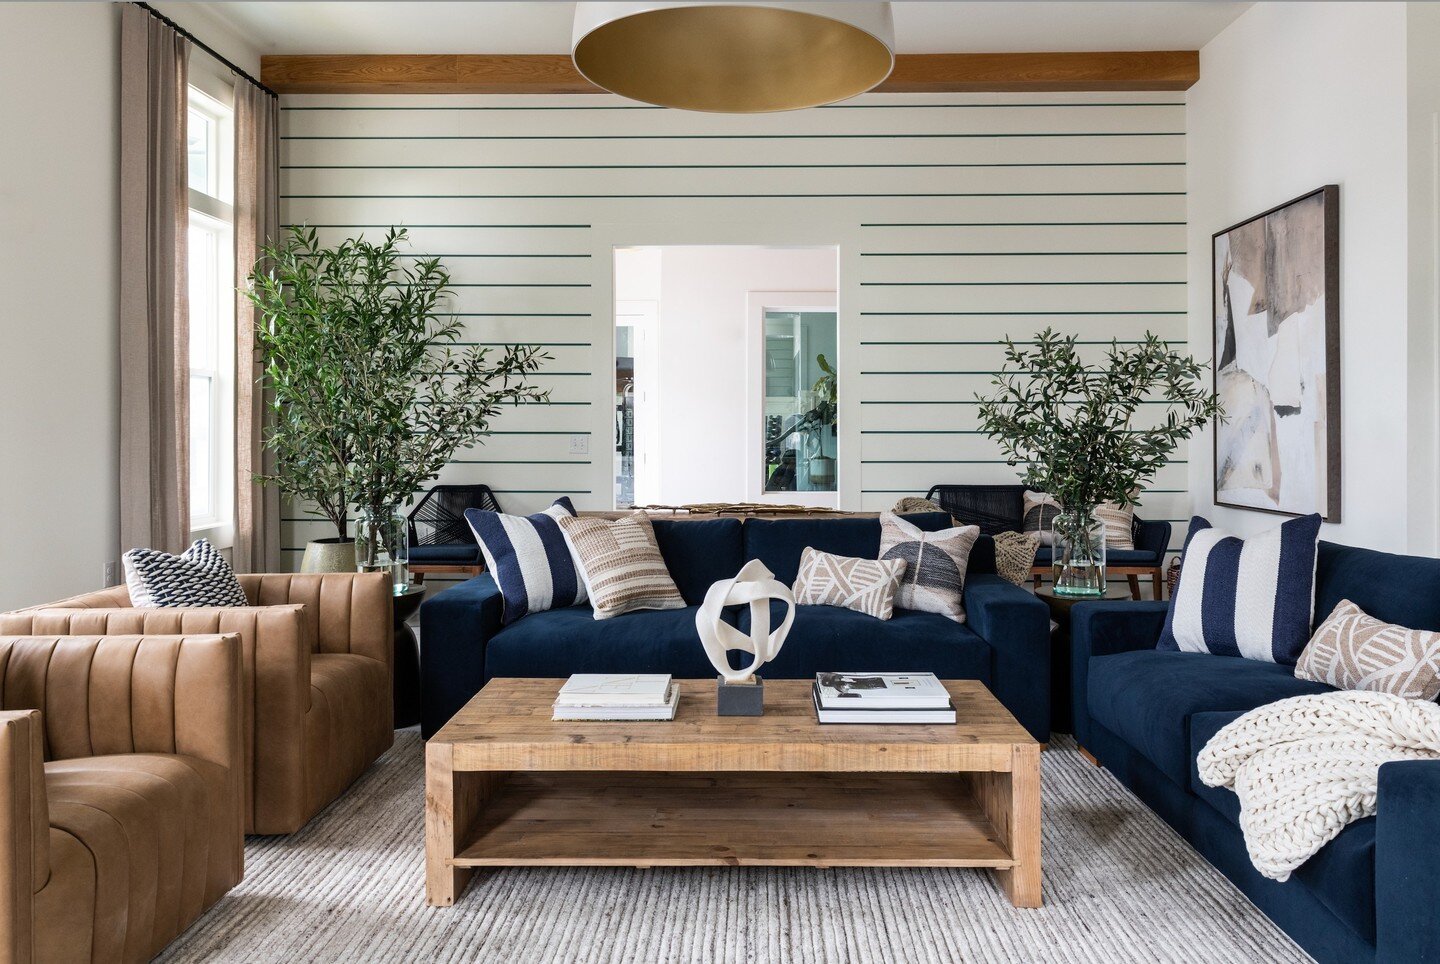 Modern Coastal Clubhouse Design...What&rsquo;s your favorite space?

#charlestonliving #charlottedesigner #commercialrealestate #moderncoastal #neutrals #westelm